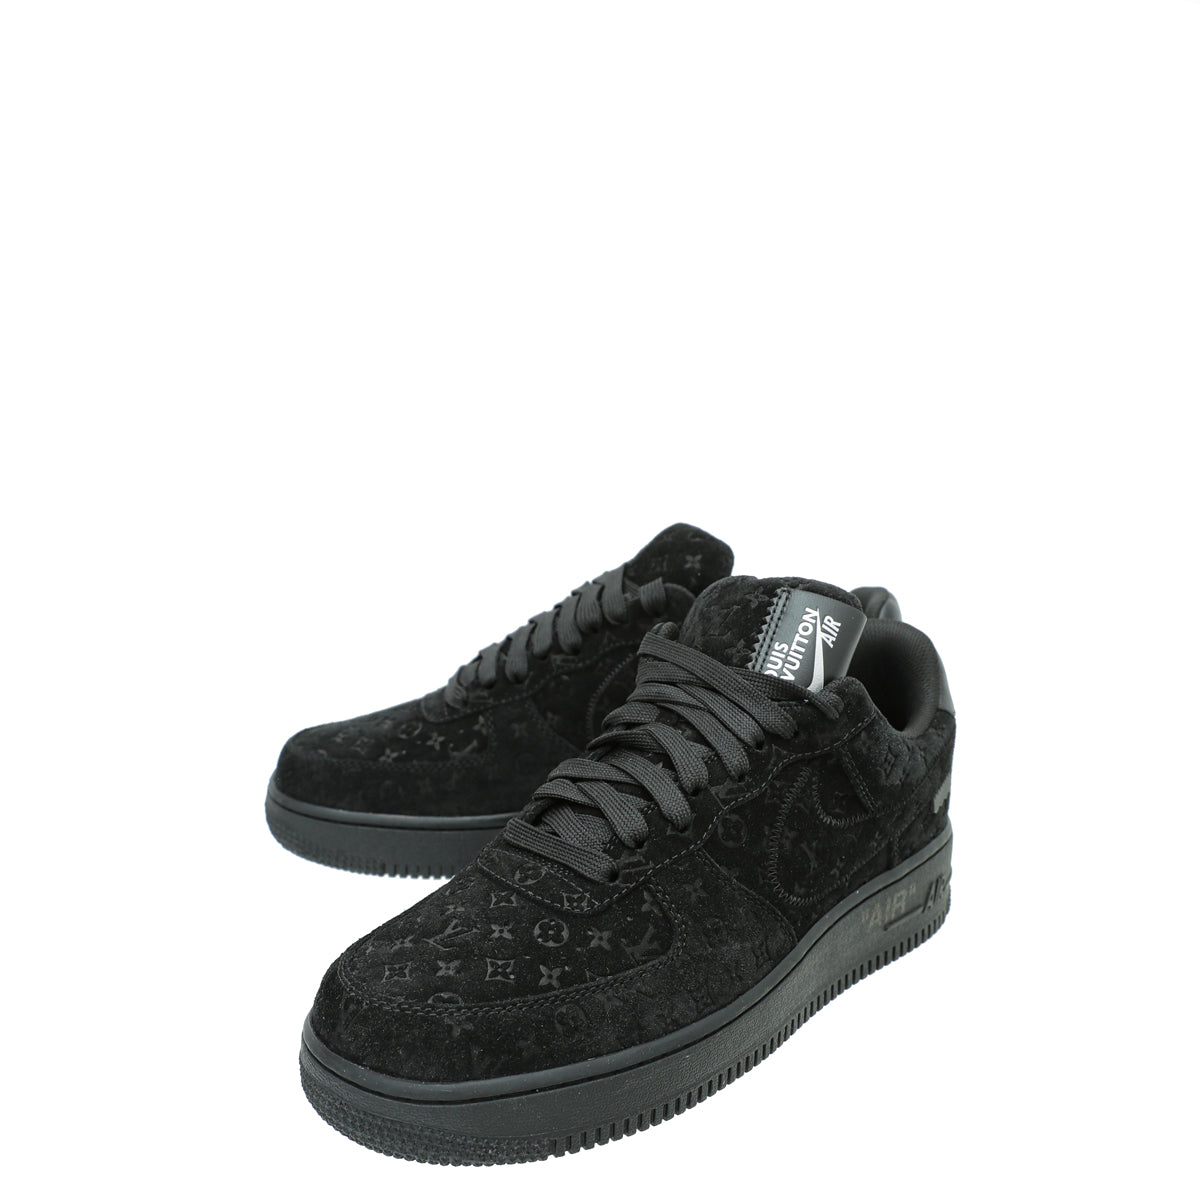 Louis Vuitton and Nike Air Force 1 Black BY VIRGIL ABLOH Sneaker